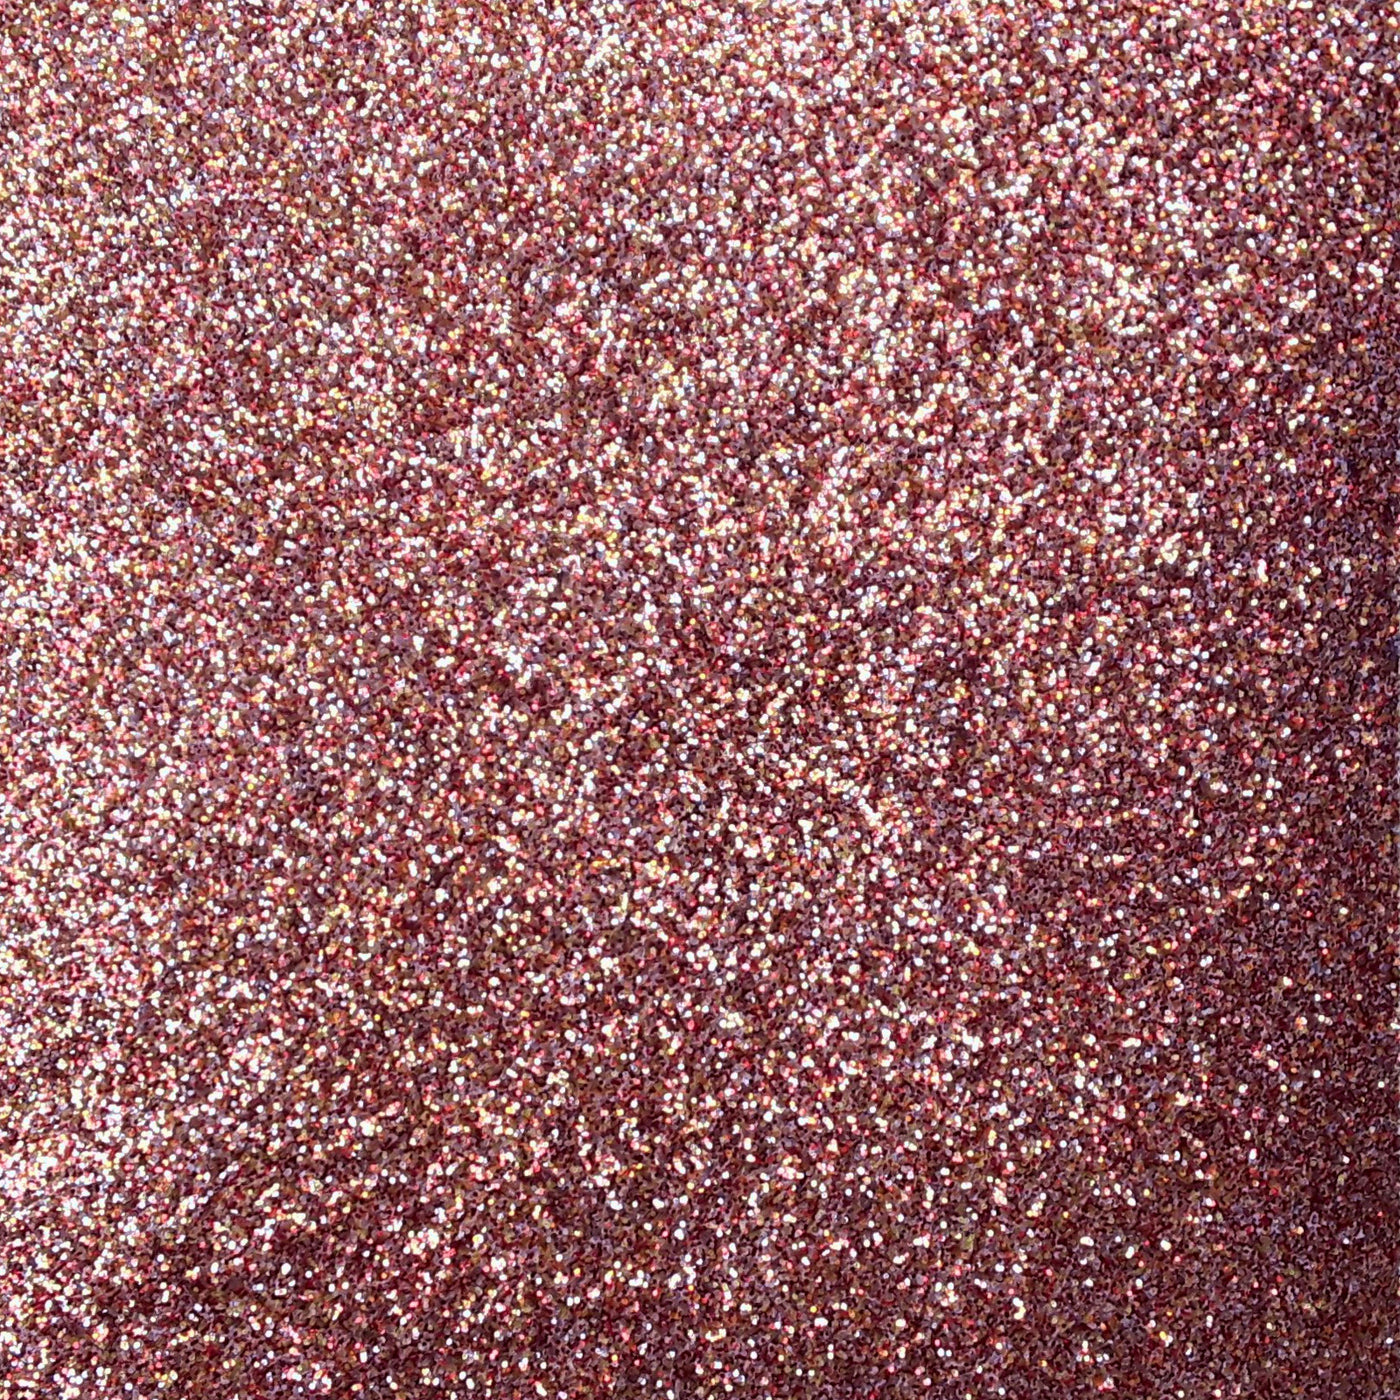 Party Glitter - 12x12 heavyweight glitter cardstock - Recollections